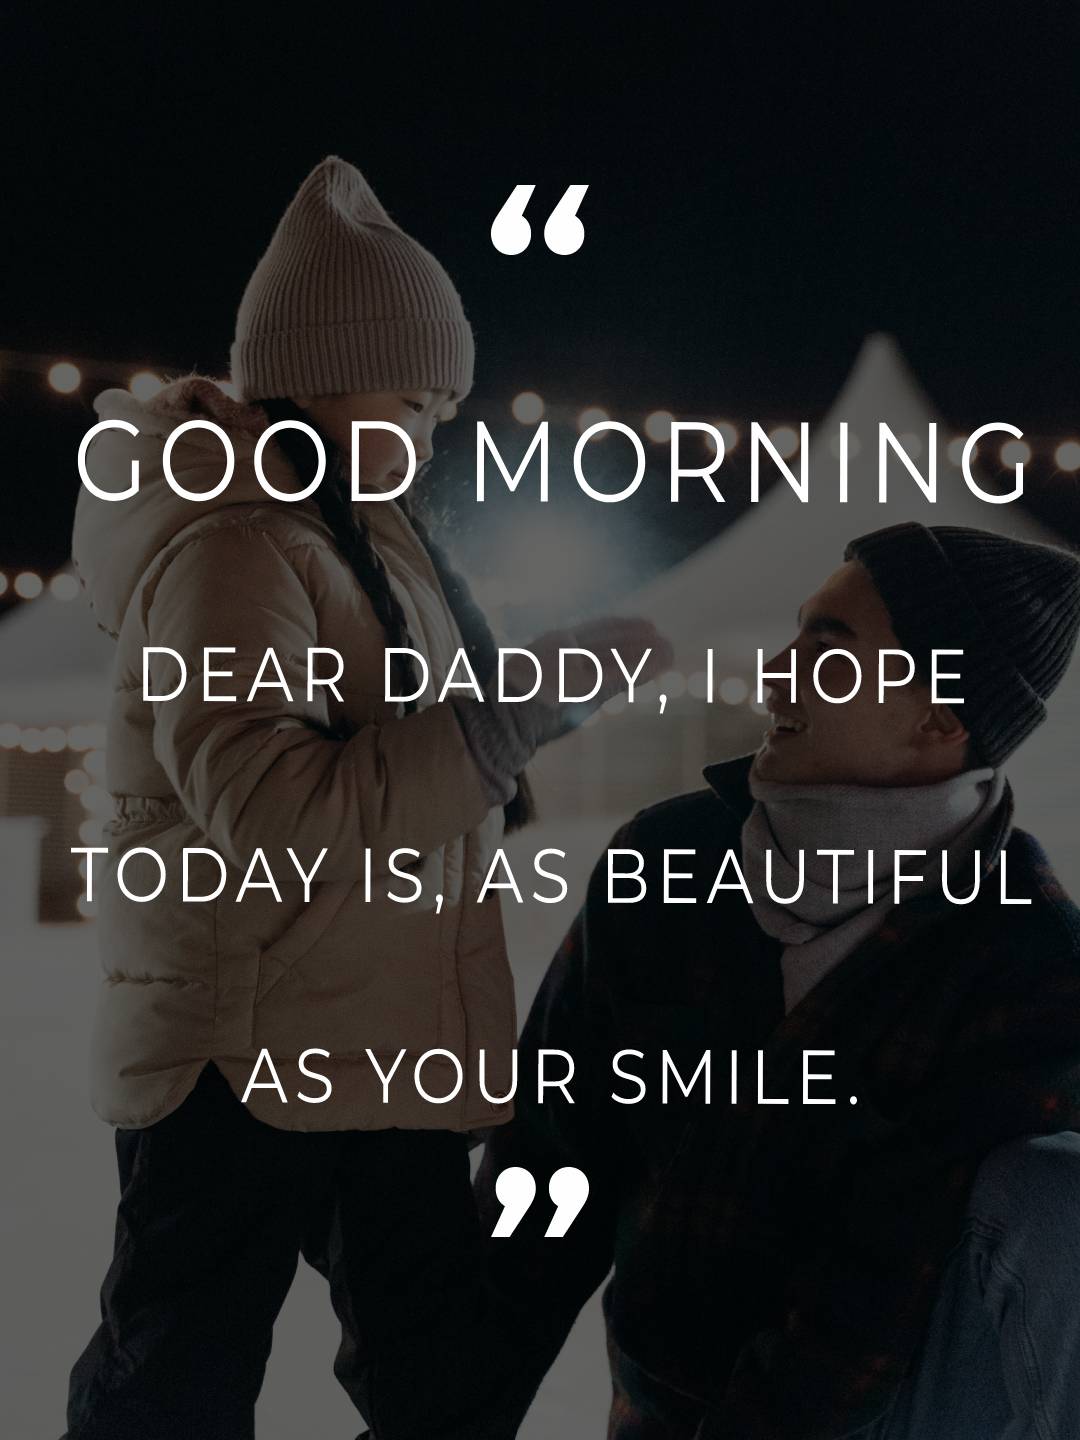 dameon king recommends good morning daddy dom quotes pic